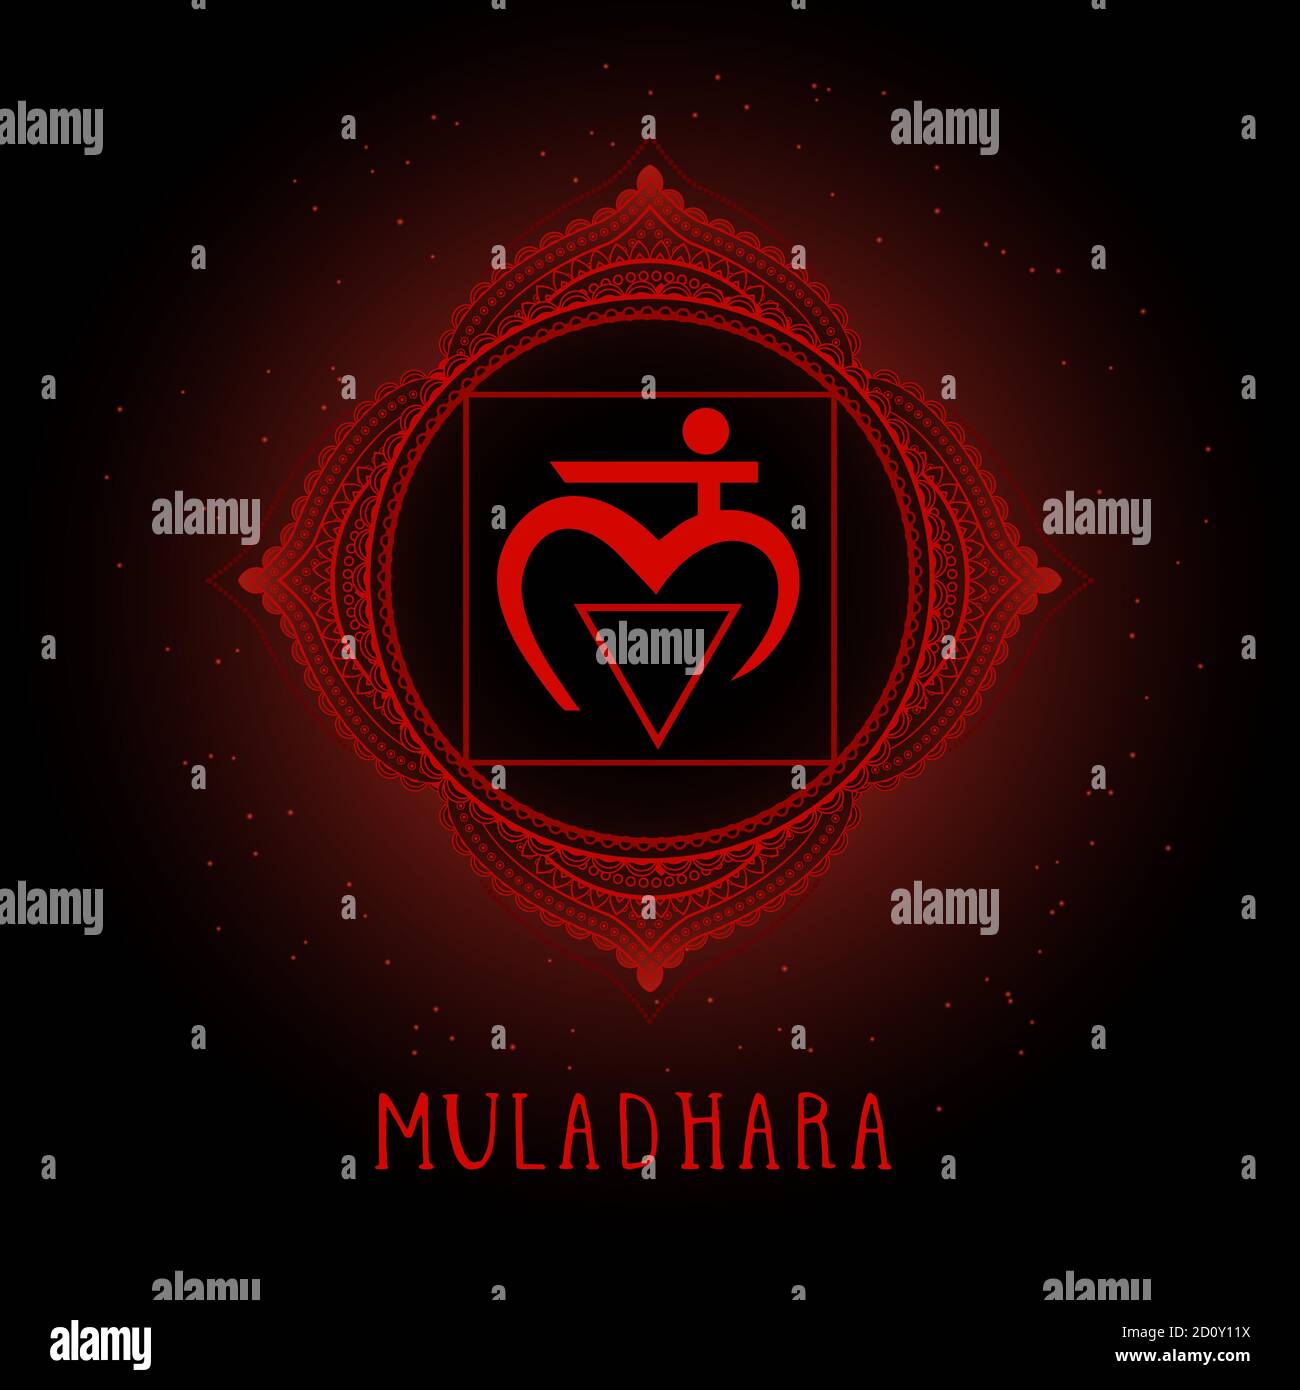 Vector illustration with symbol Muladhara - Root chakra on black background. Round mandala pattern and hand drawn lettering. Colored. Stock Vector